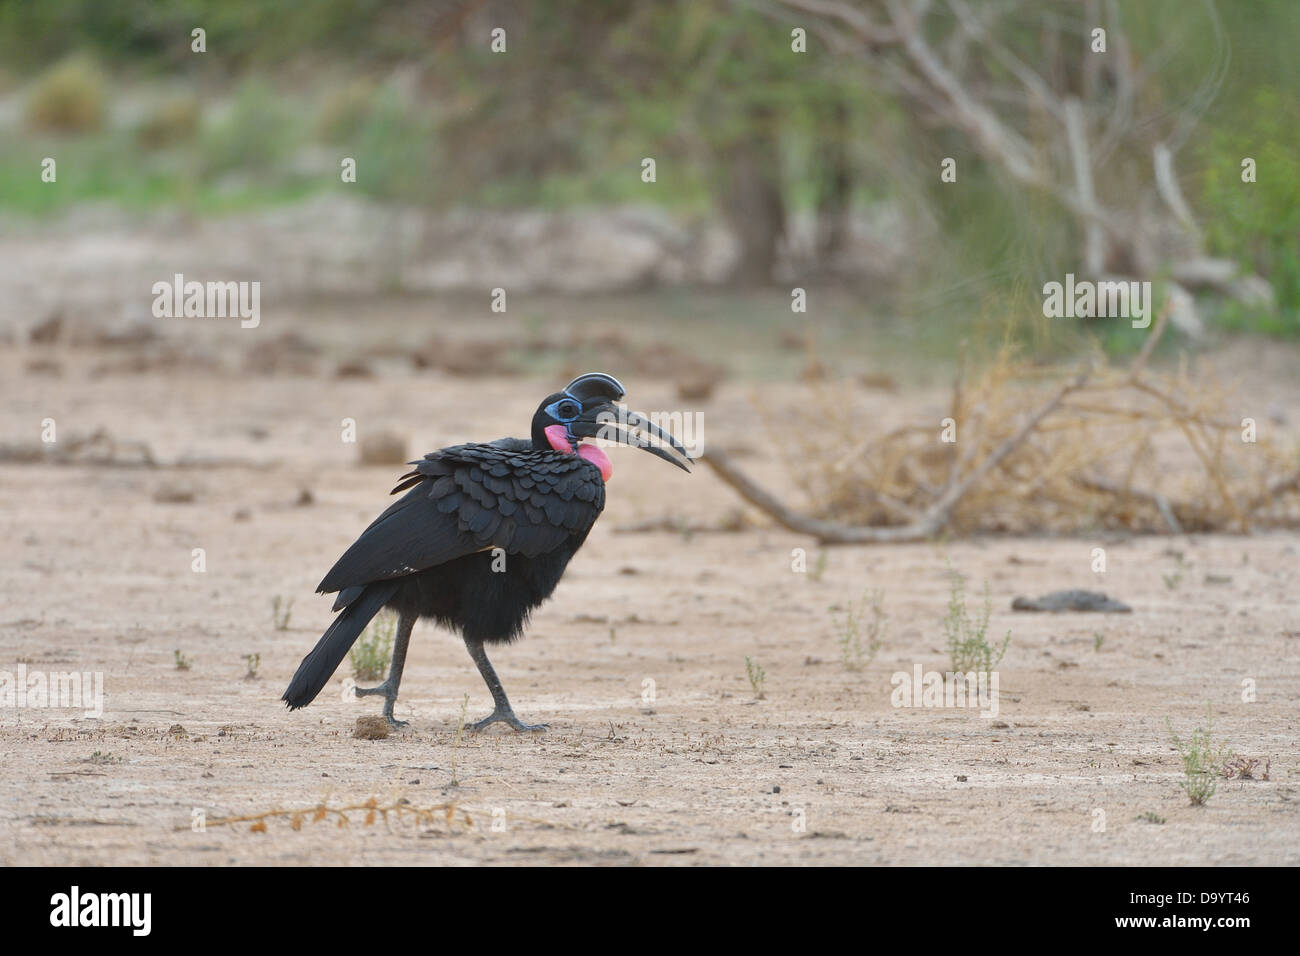 Abyssinian Ground-Hornbill - Northern Ground-Hornbill (Bucorvus abyssinicus) looking for food on the ground W Regional Park Stock Photo